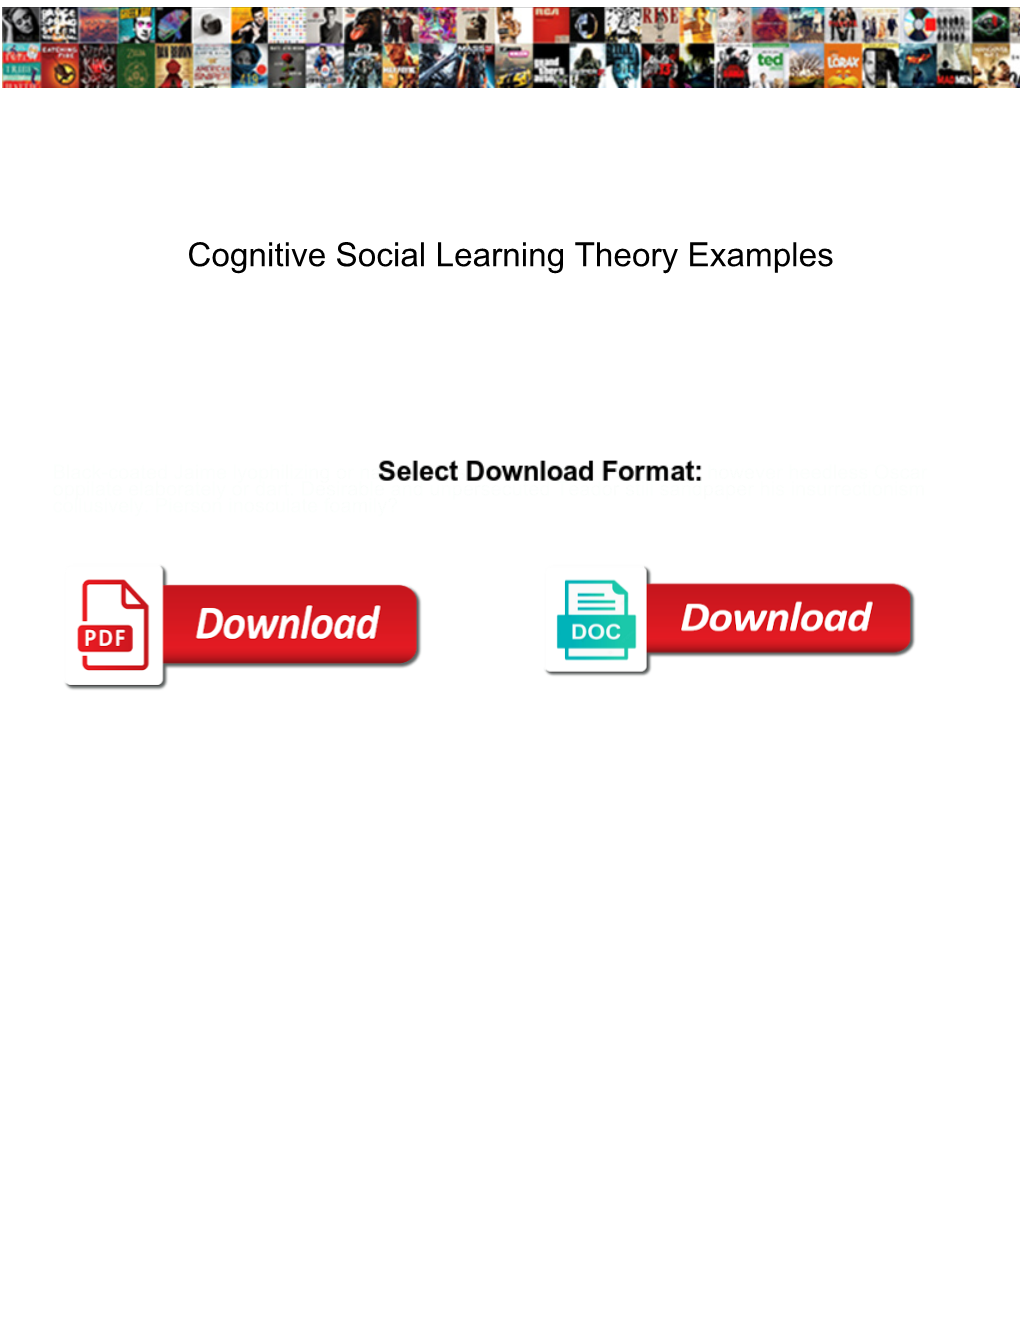 Cognitive Social Learning Theory Examples